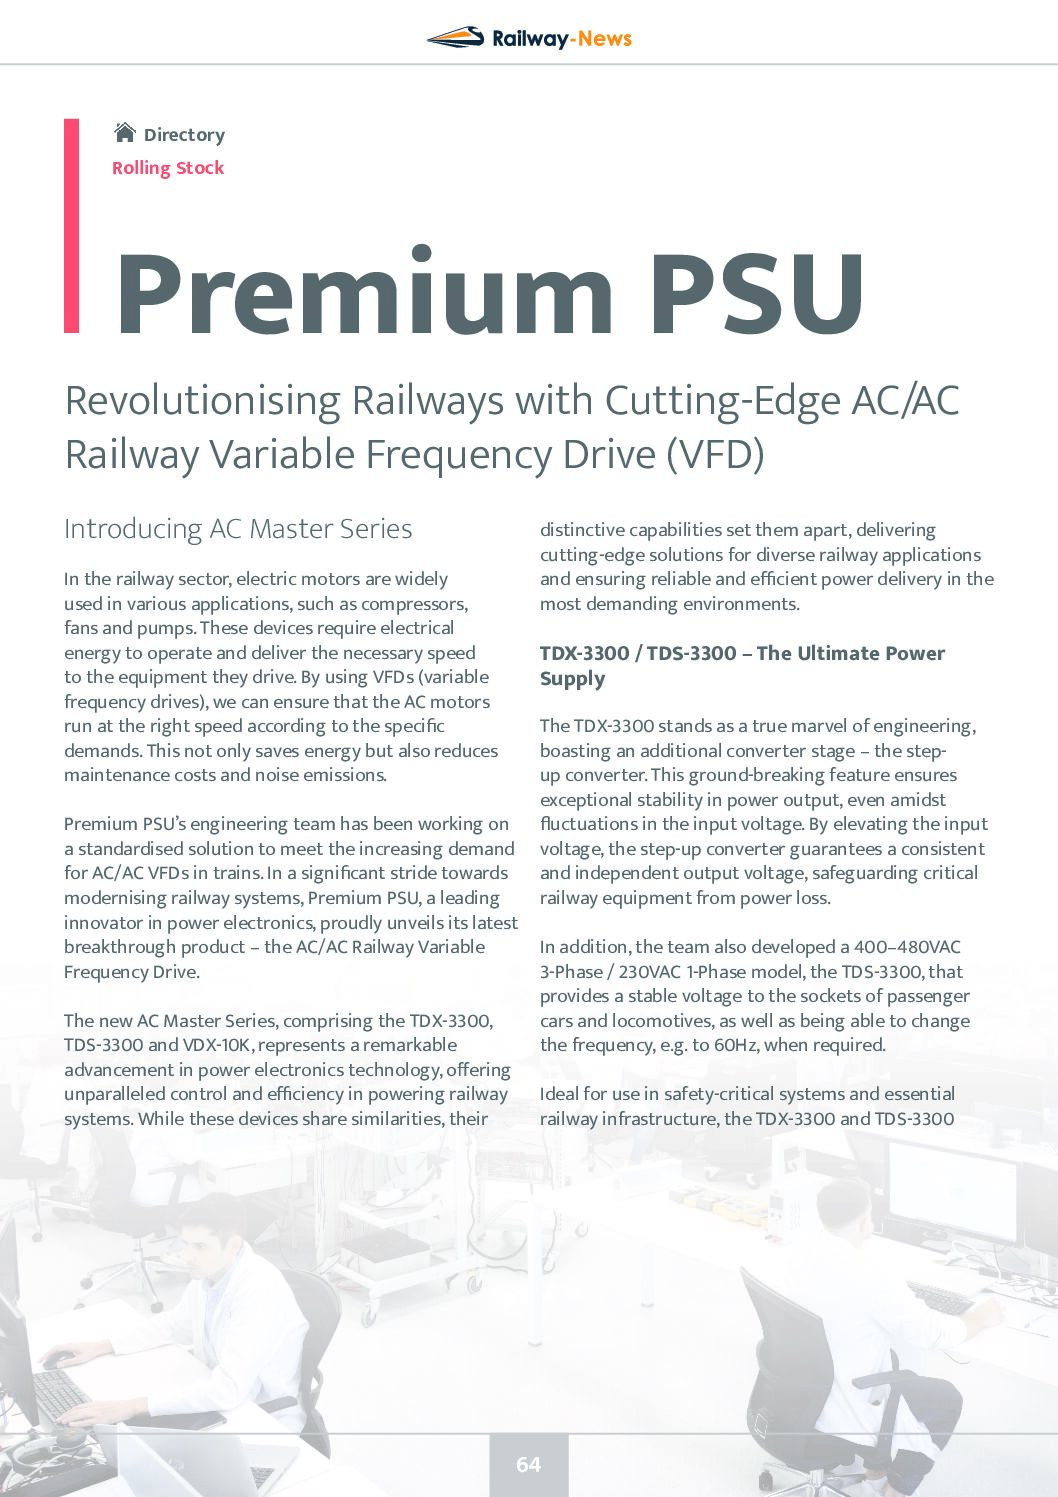 Revolutionising Railways with Cutting-Edge AC/AC Railway Variable Frequency Drive (VFD)